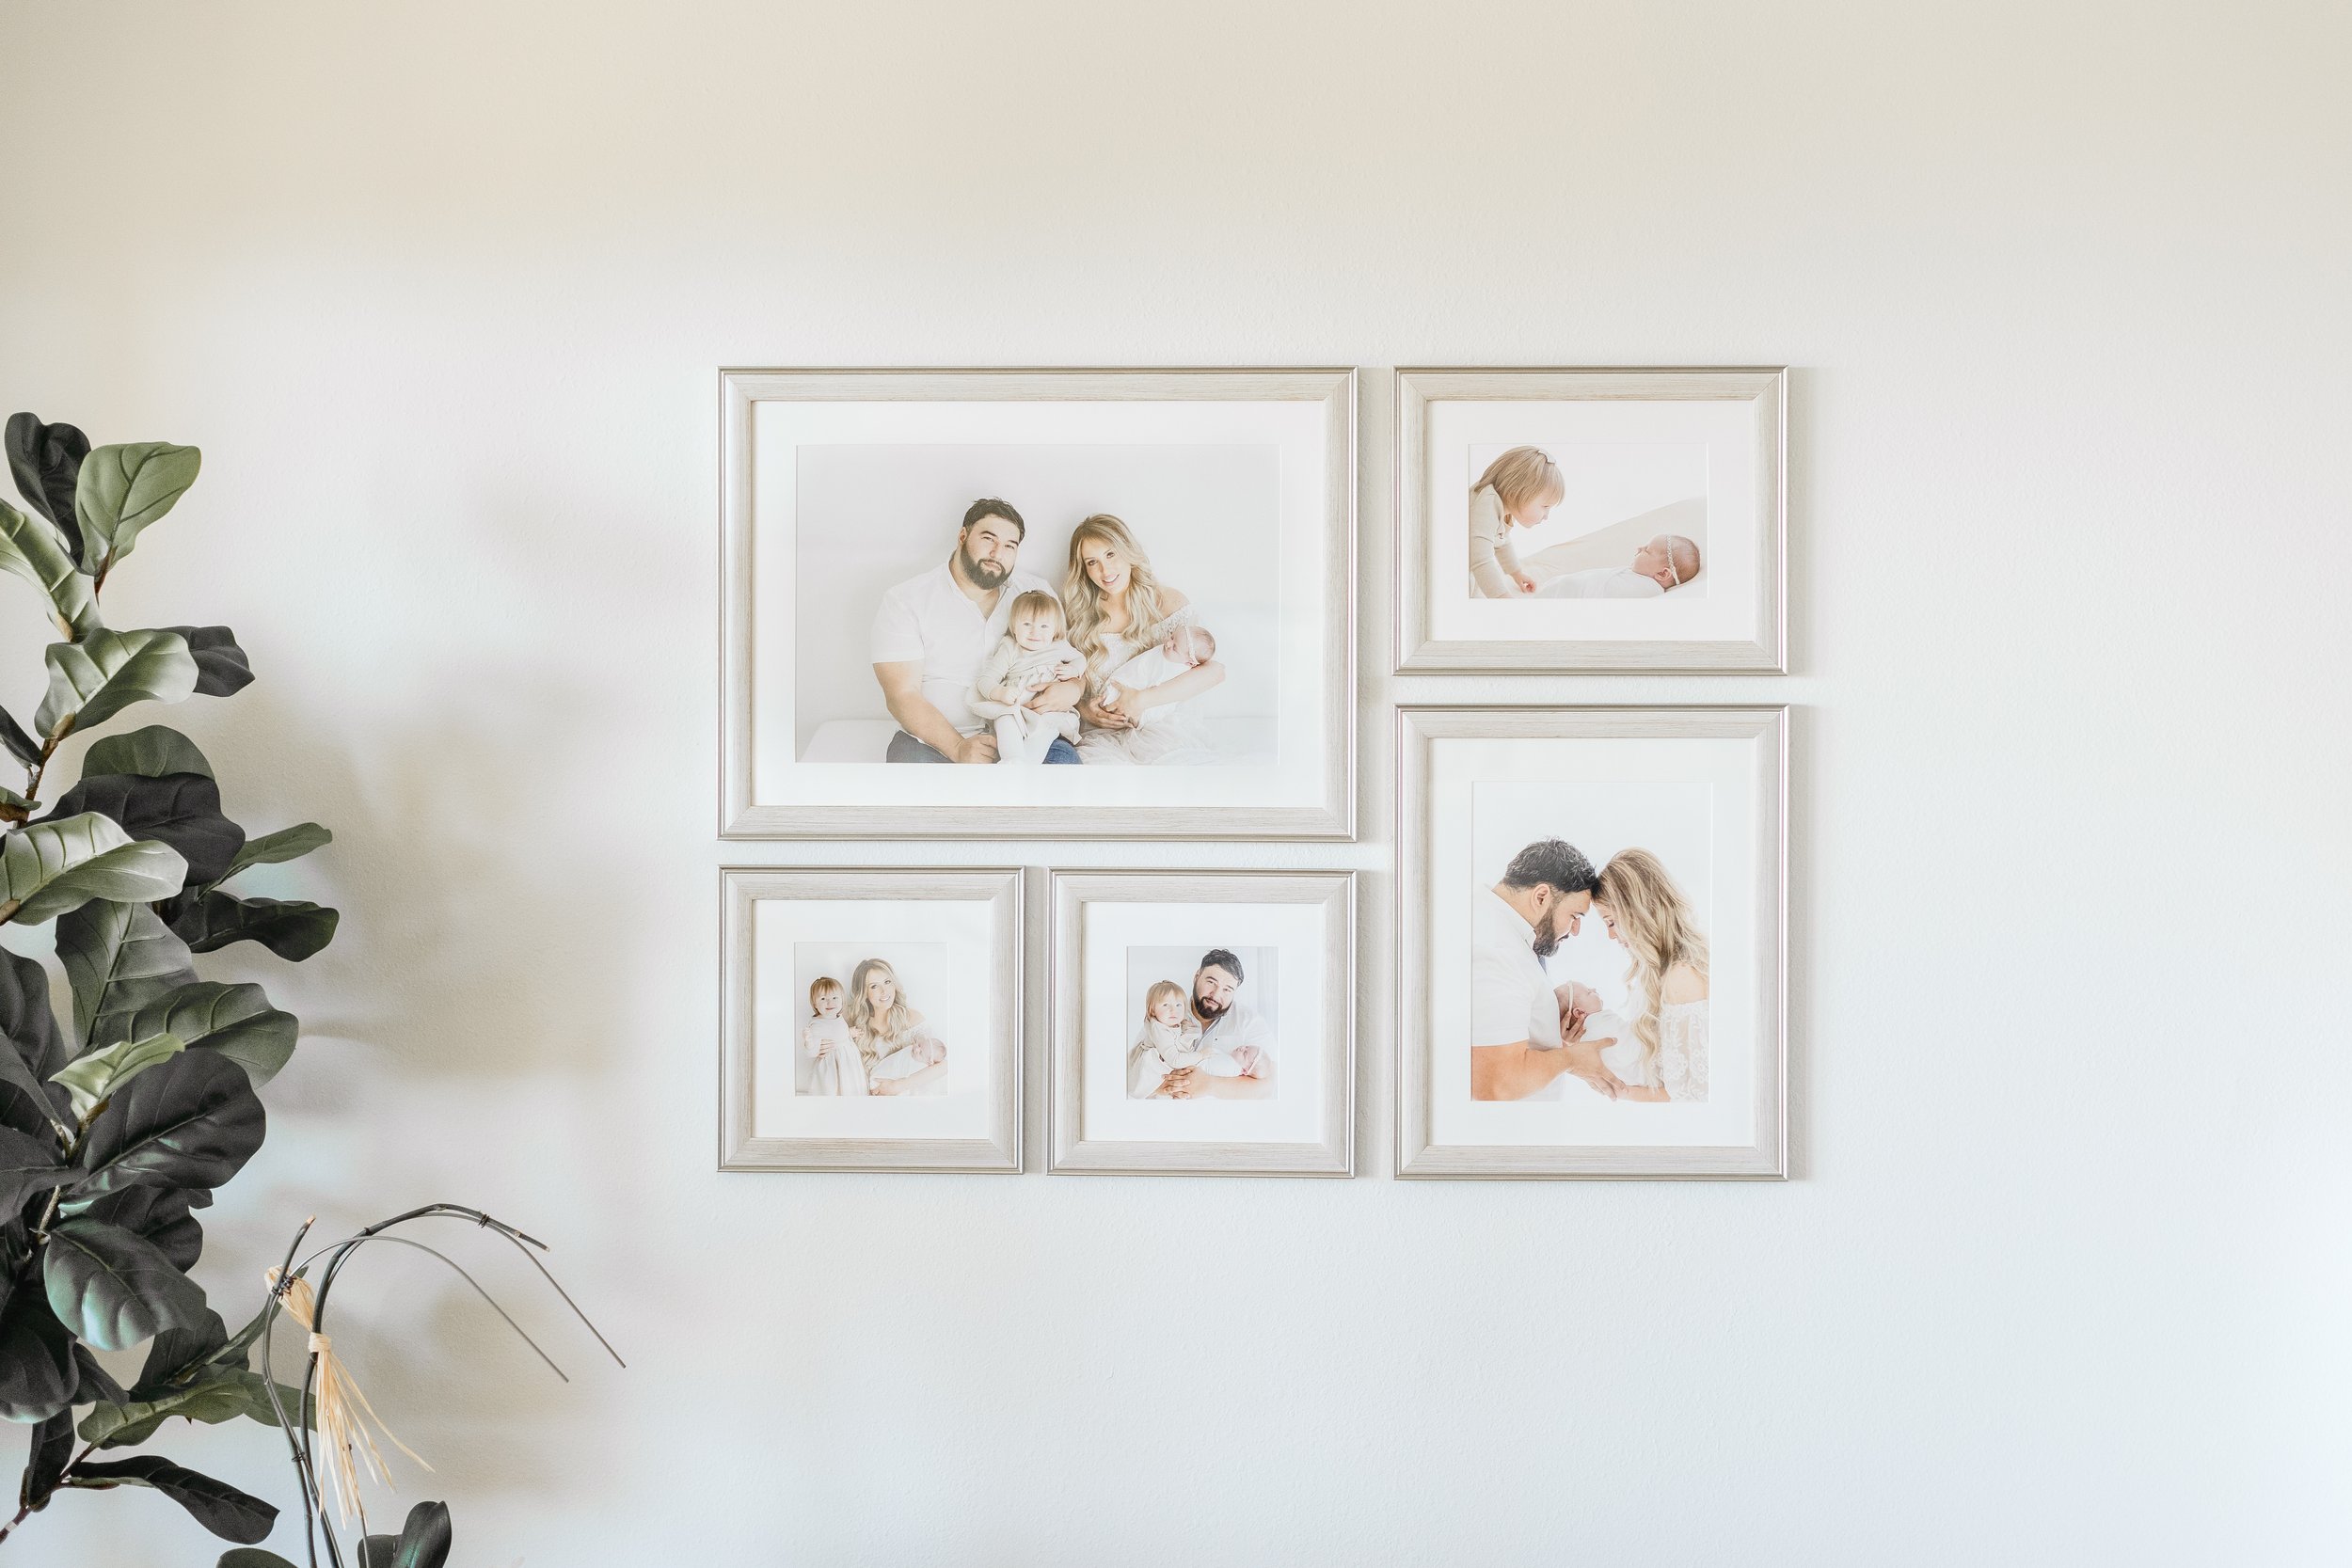 Custom designed wall gallery for family in Newport Coast